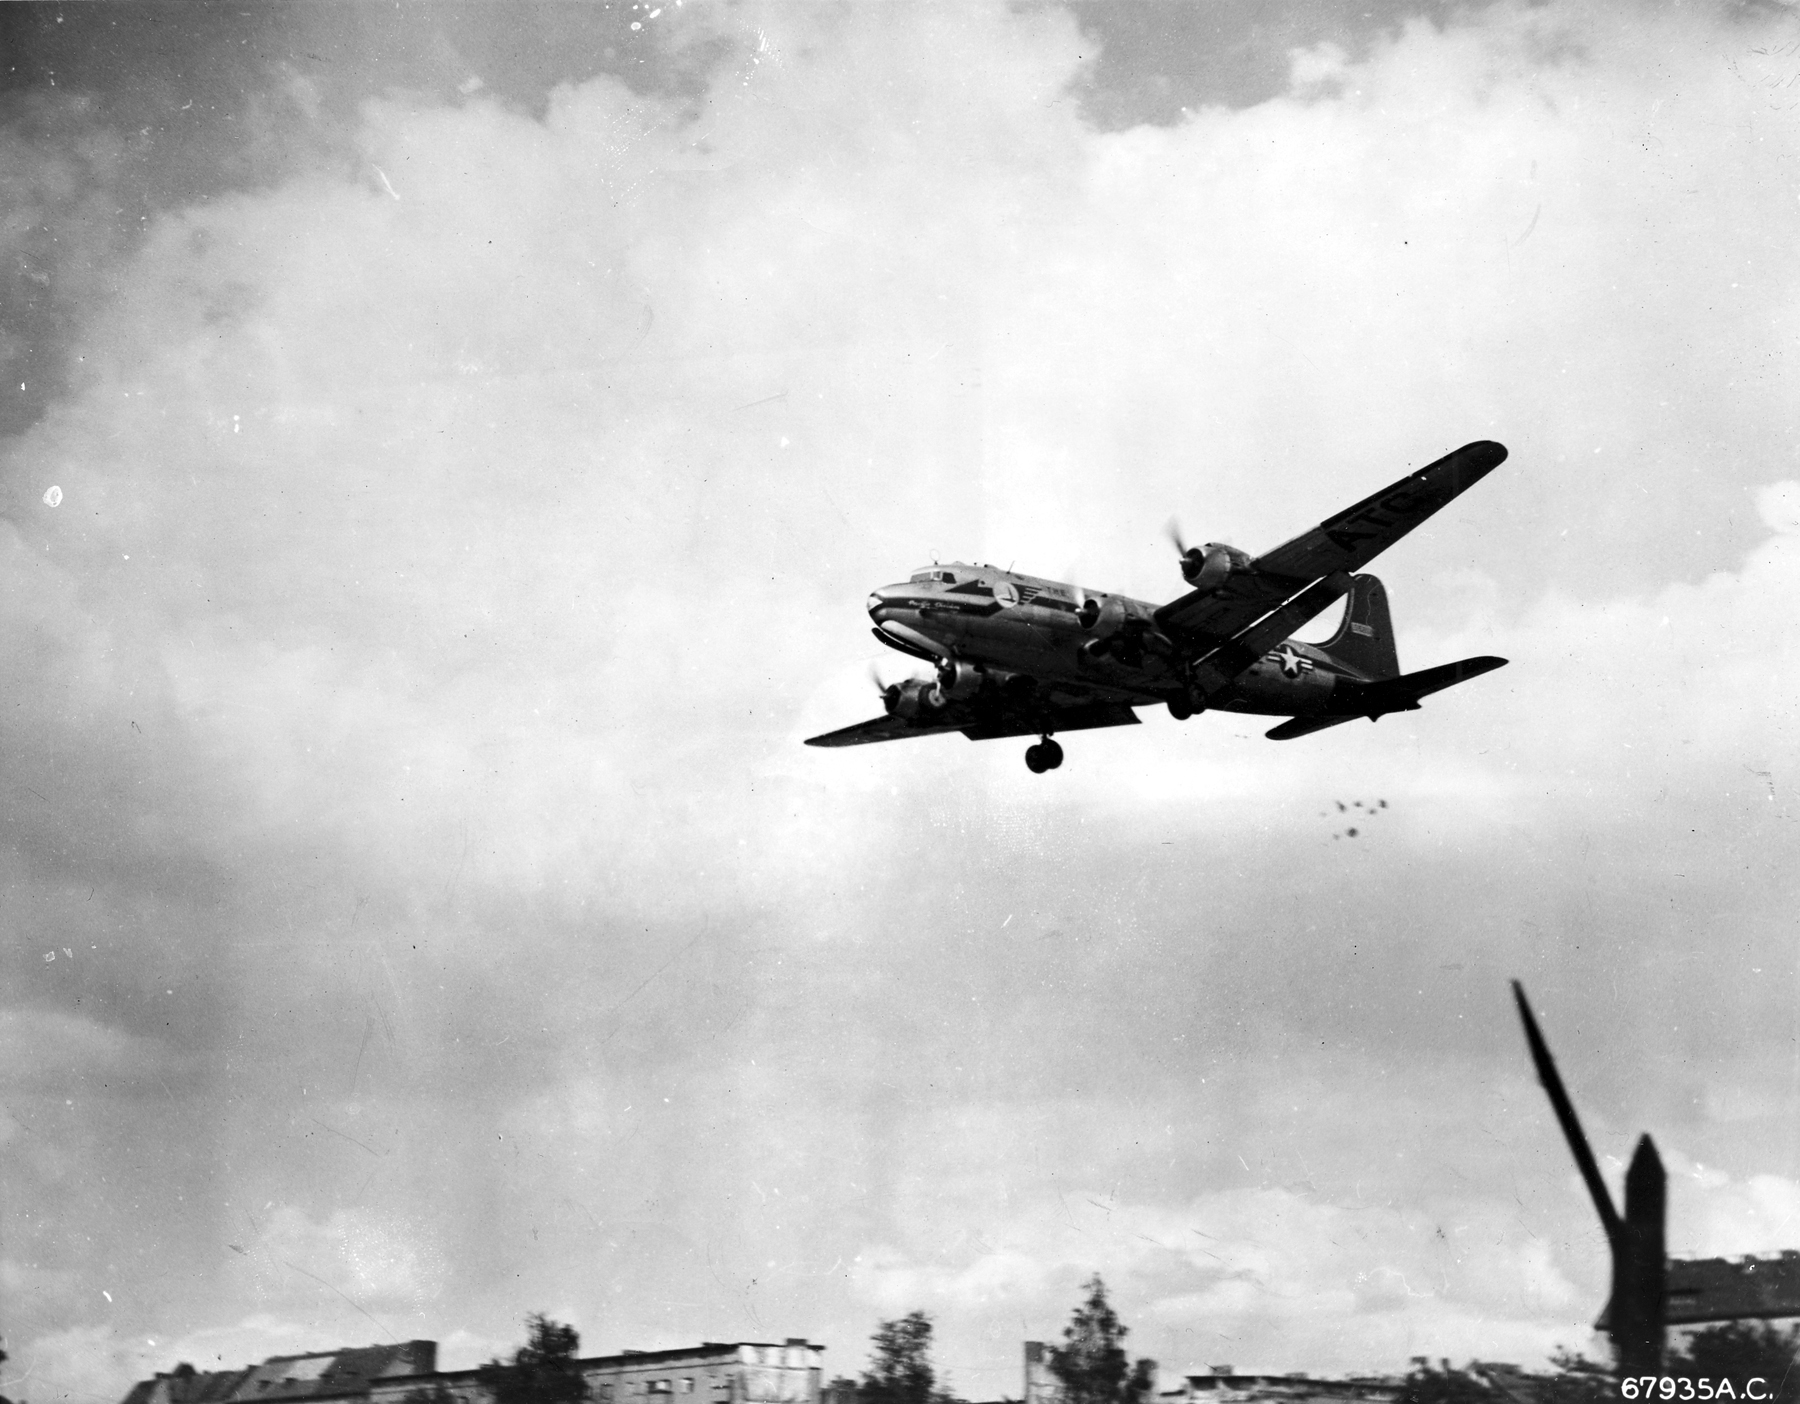 A "Little Vittles" candy drop. Note the parachutes below the tail of the C-54. (U.S. Air Force photo)